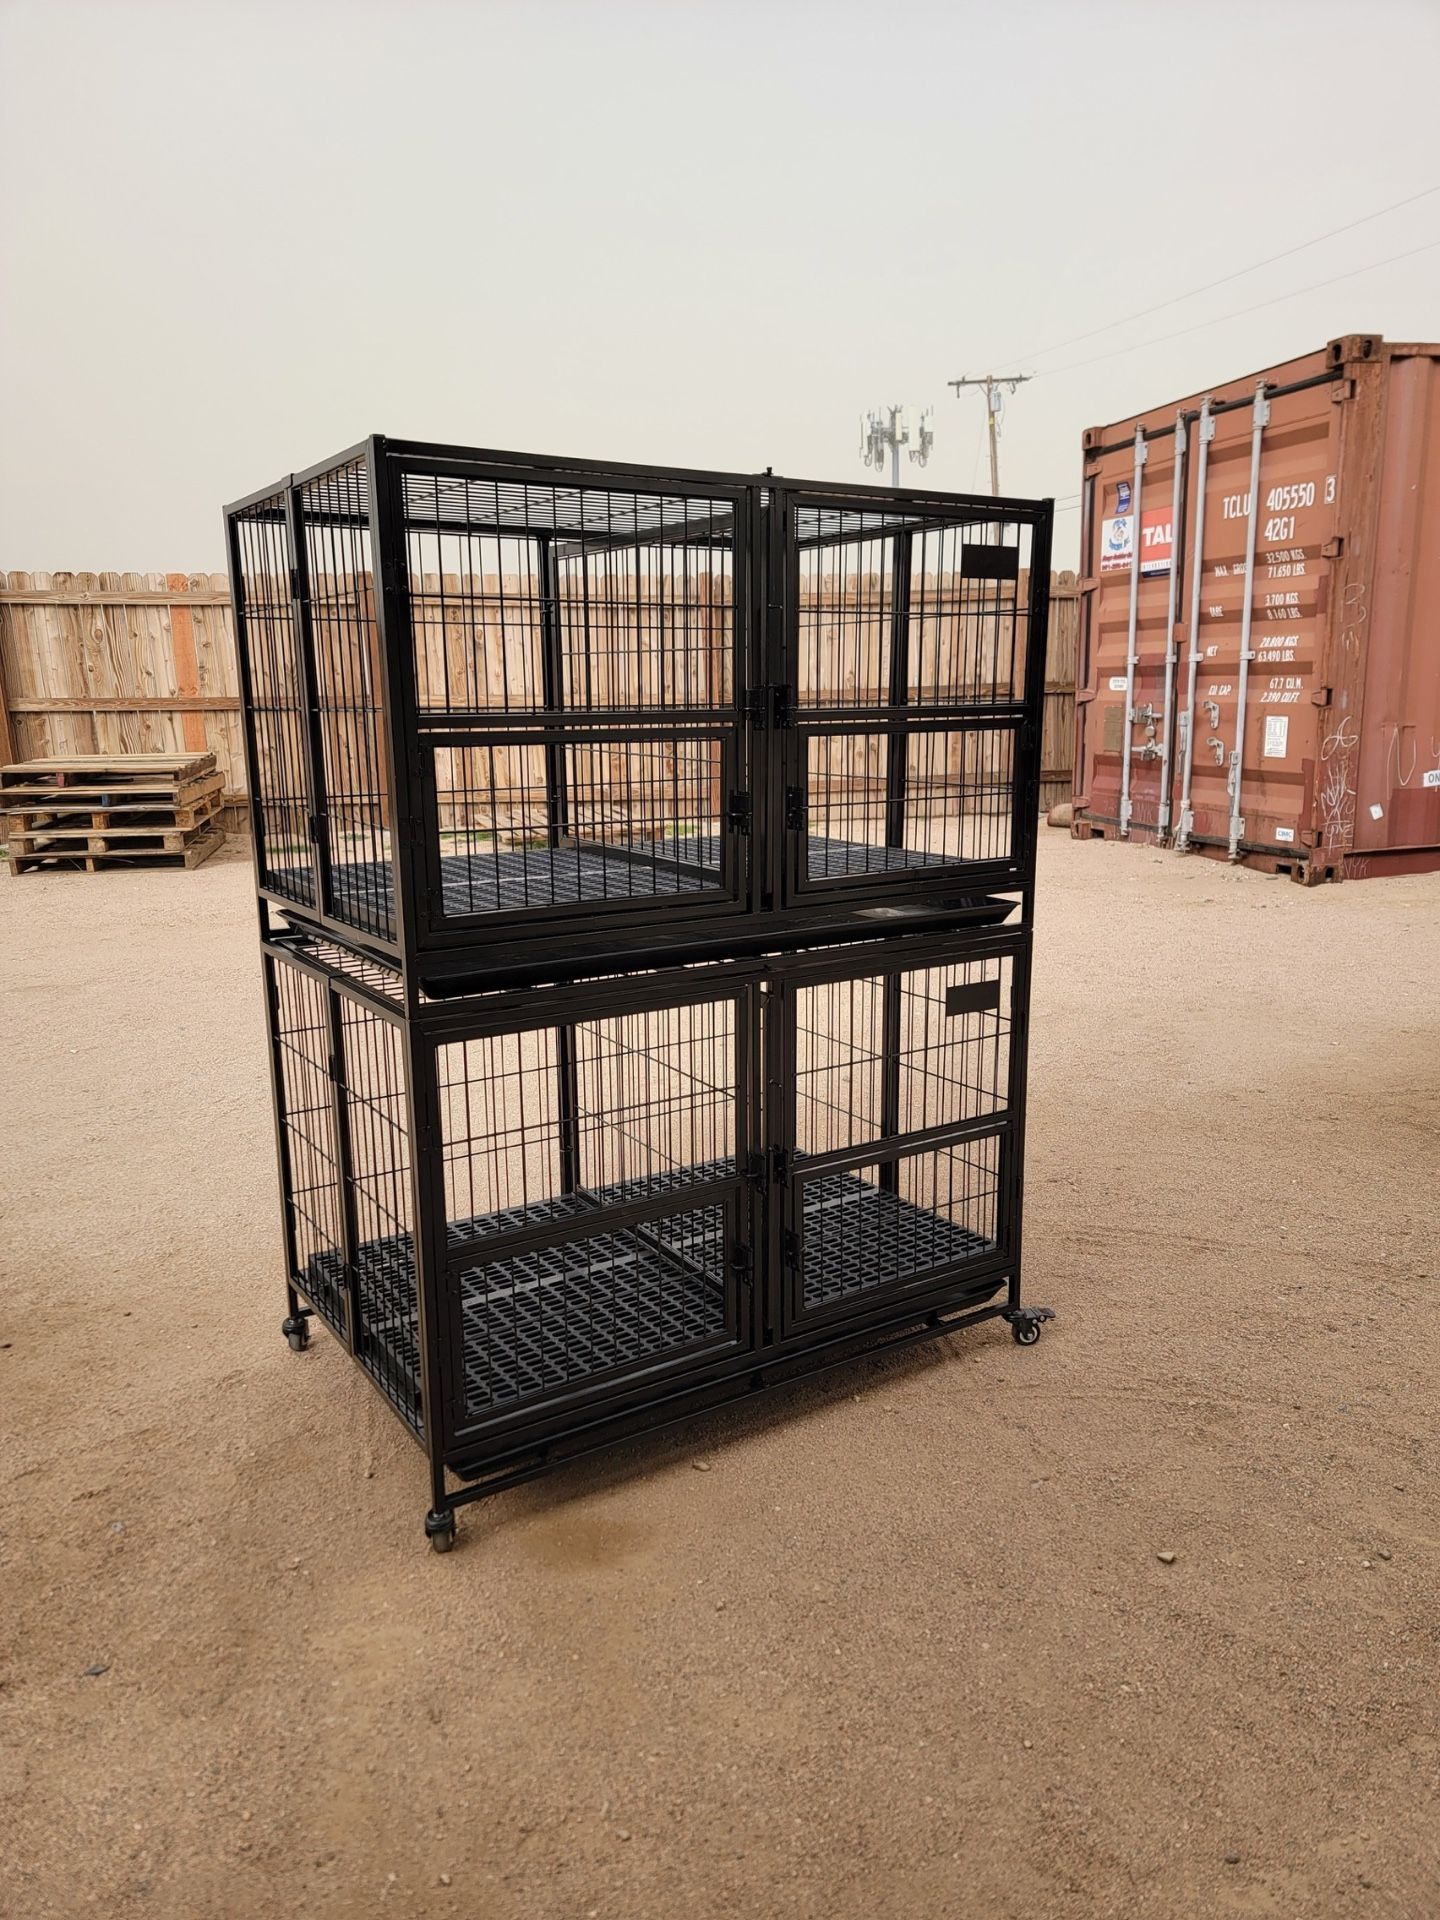 New! 43” Large 2-Tier Dog Crate Cage With Removable Center Divider; Includes Floor Grids, Foldable, Easy To Clean! 📦 